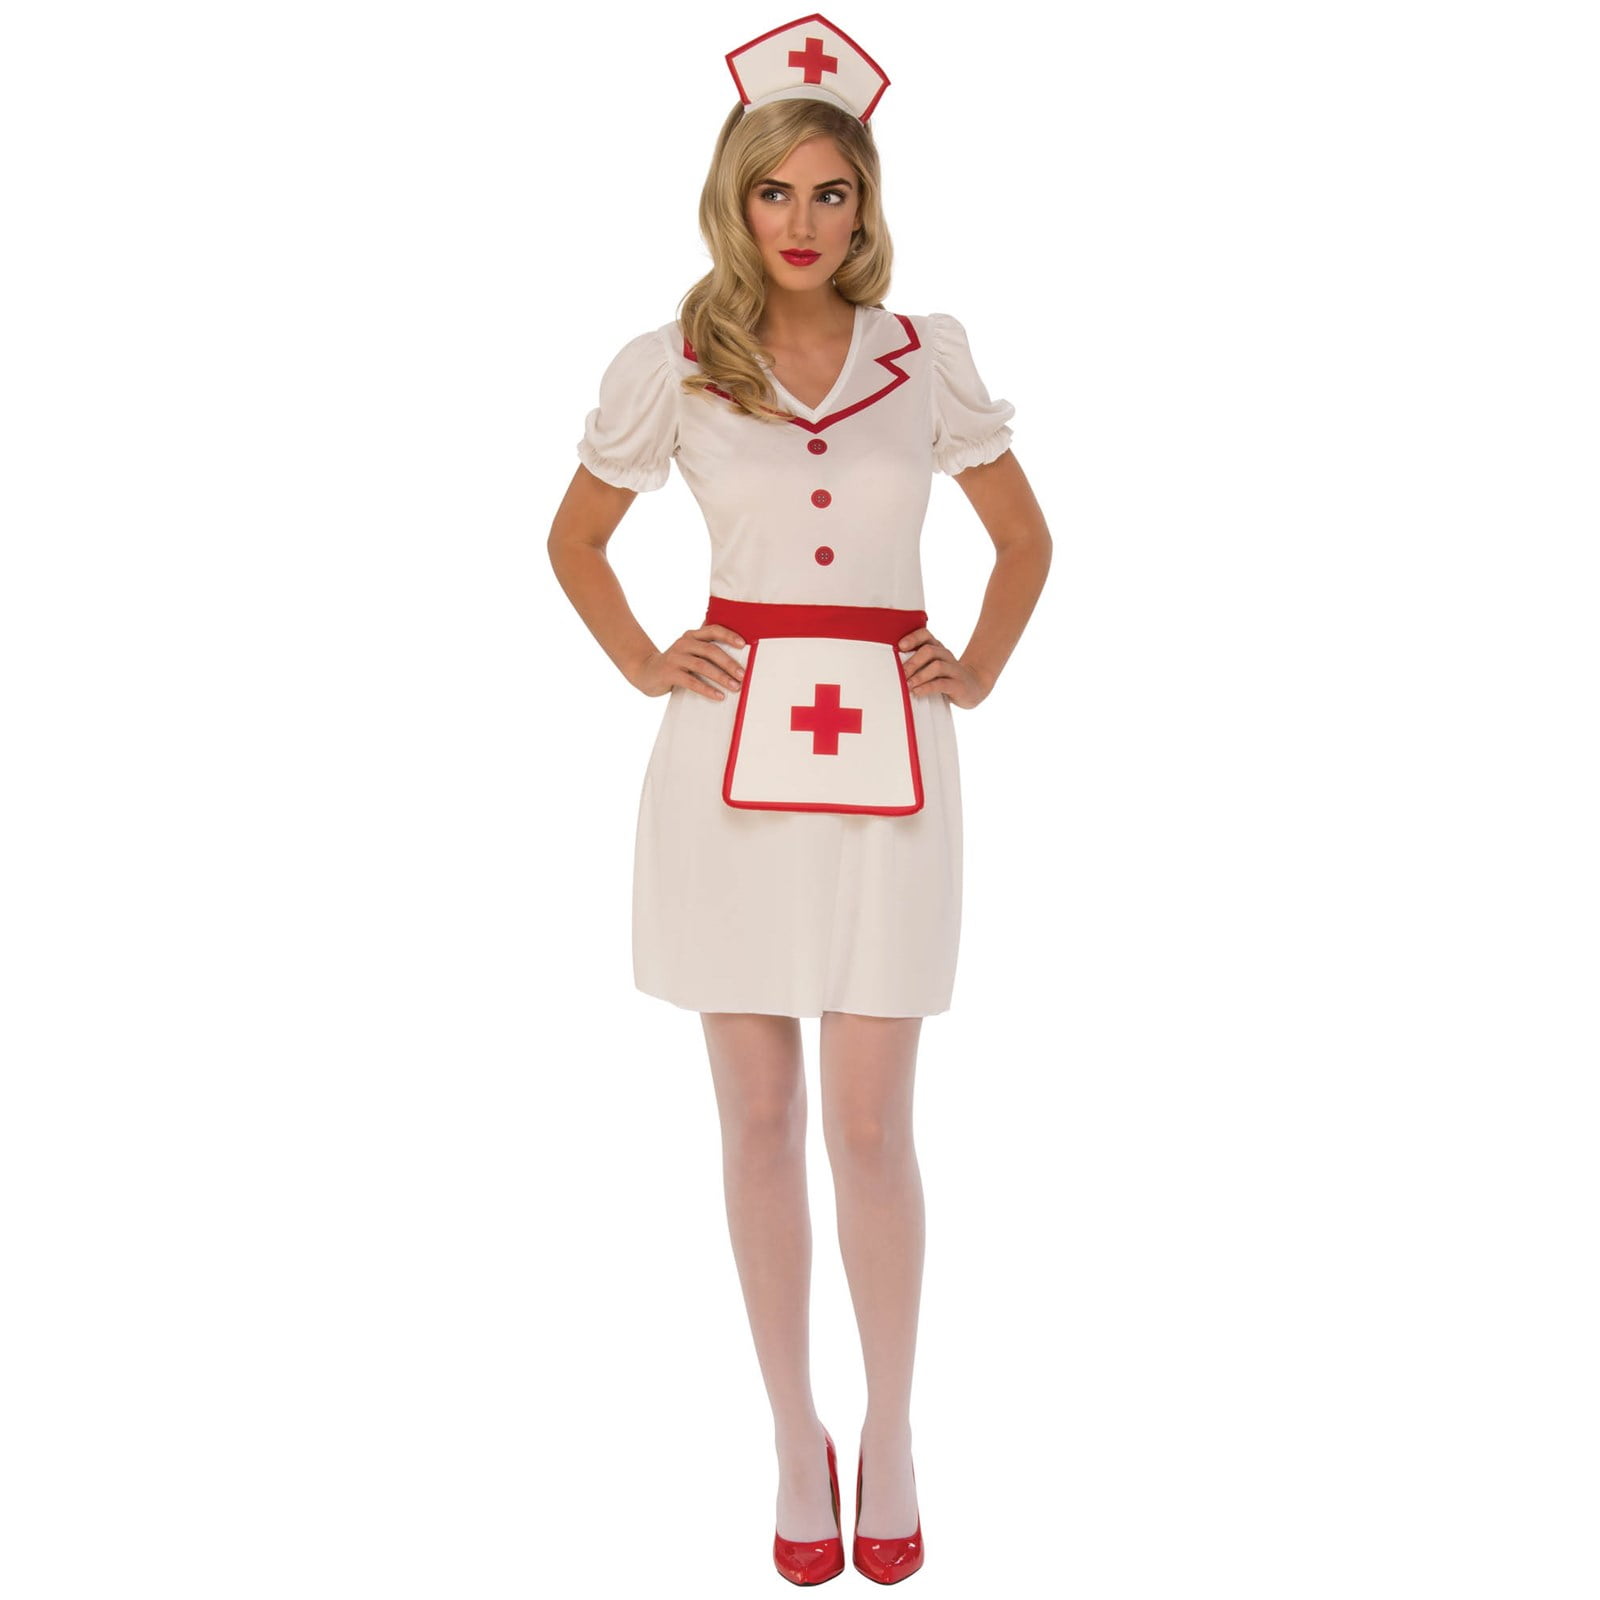 Details about   UNDERWRAPS NURSE FITTED SHIRT WITH HAT WOMEN HALLOWEEN COSTUME 